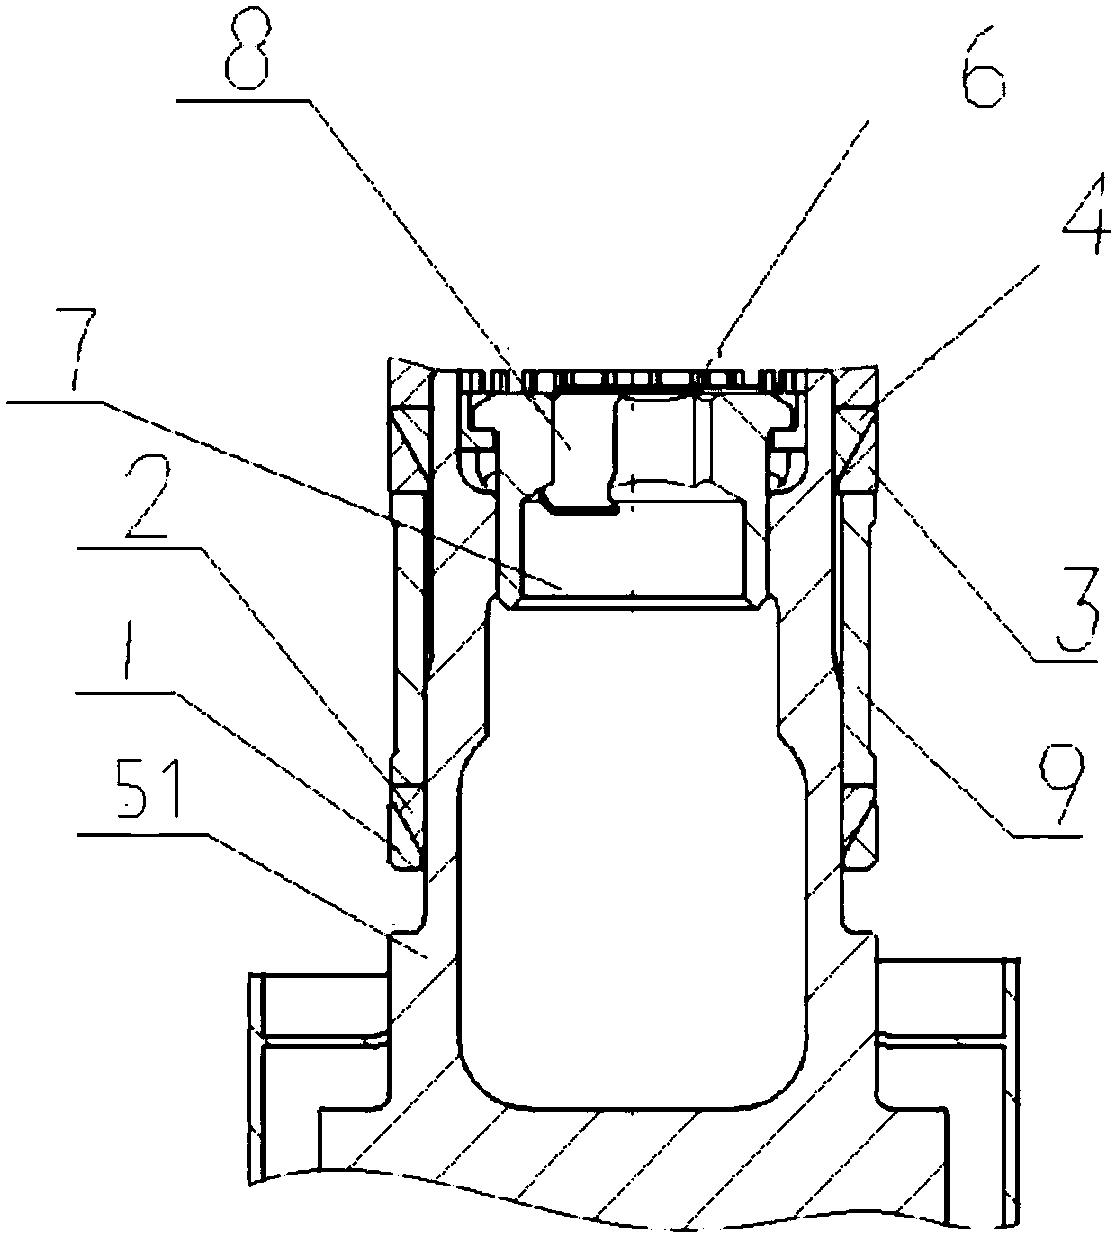 A kind of connecting device for bearing hanging point at thin wing